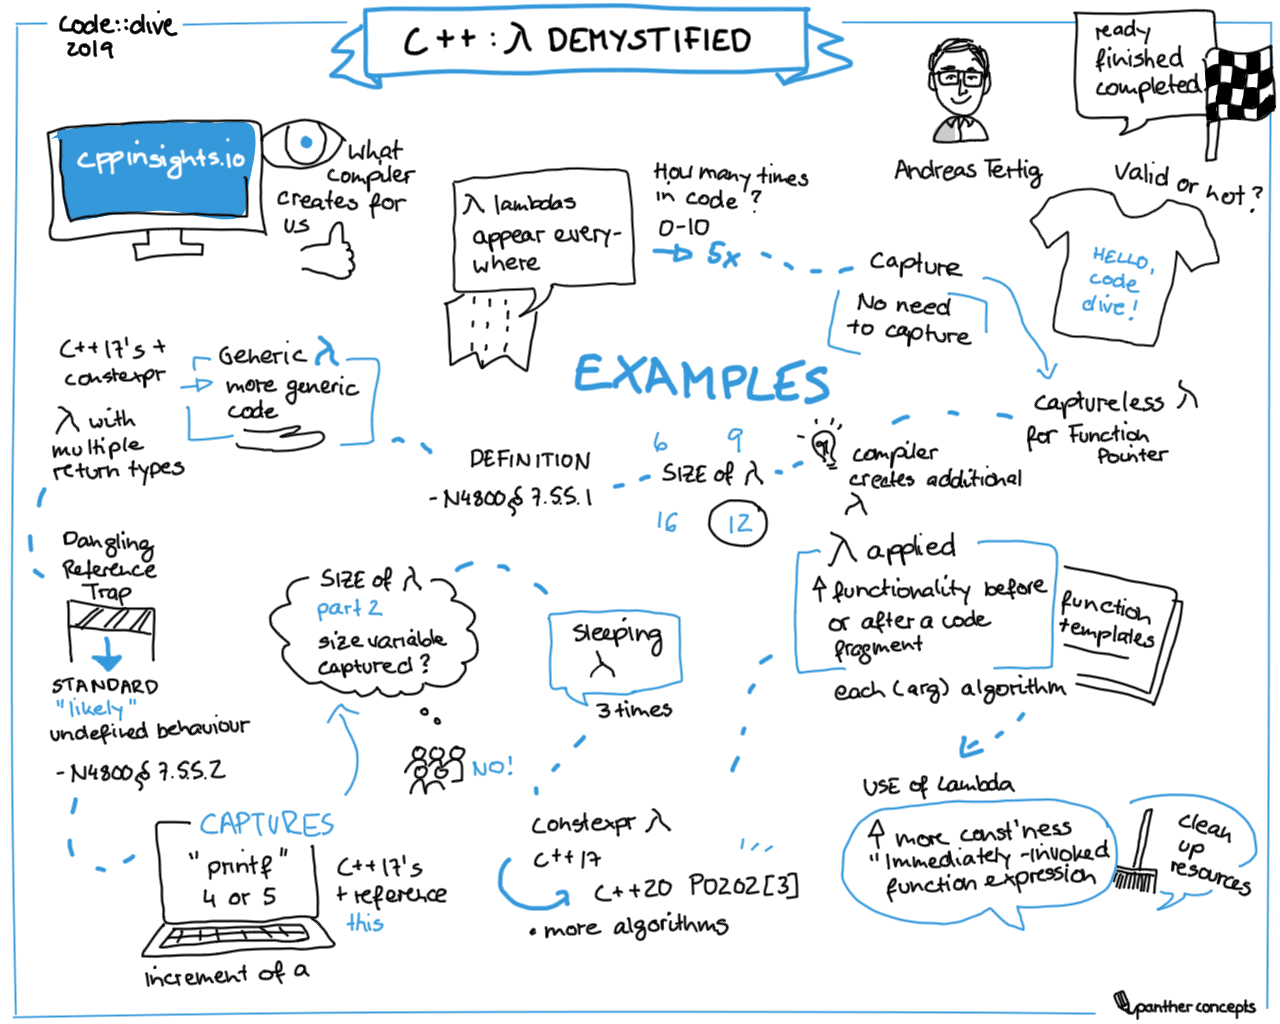 Picture of a sketchnote recording from a talk.